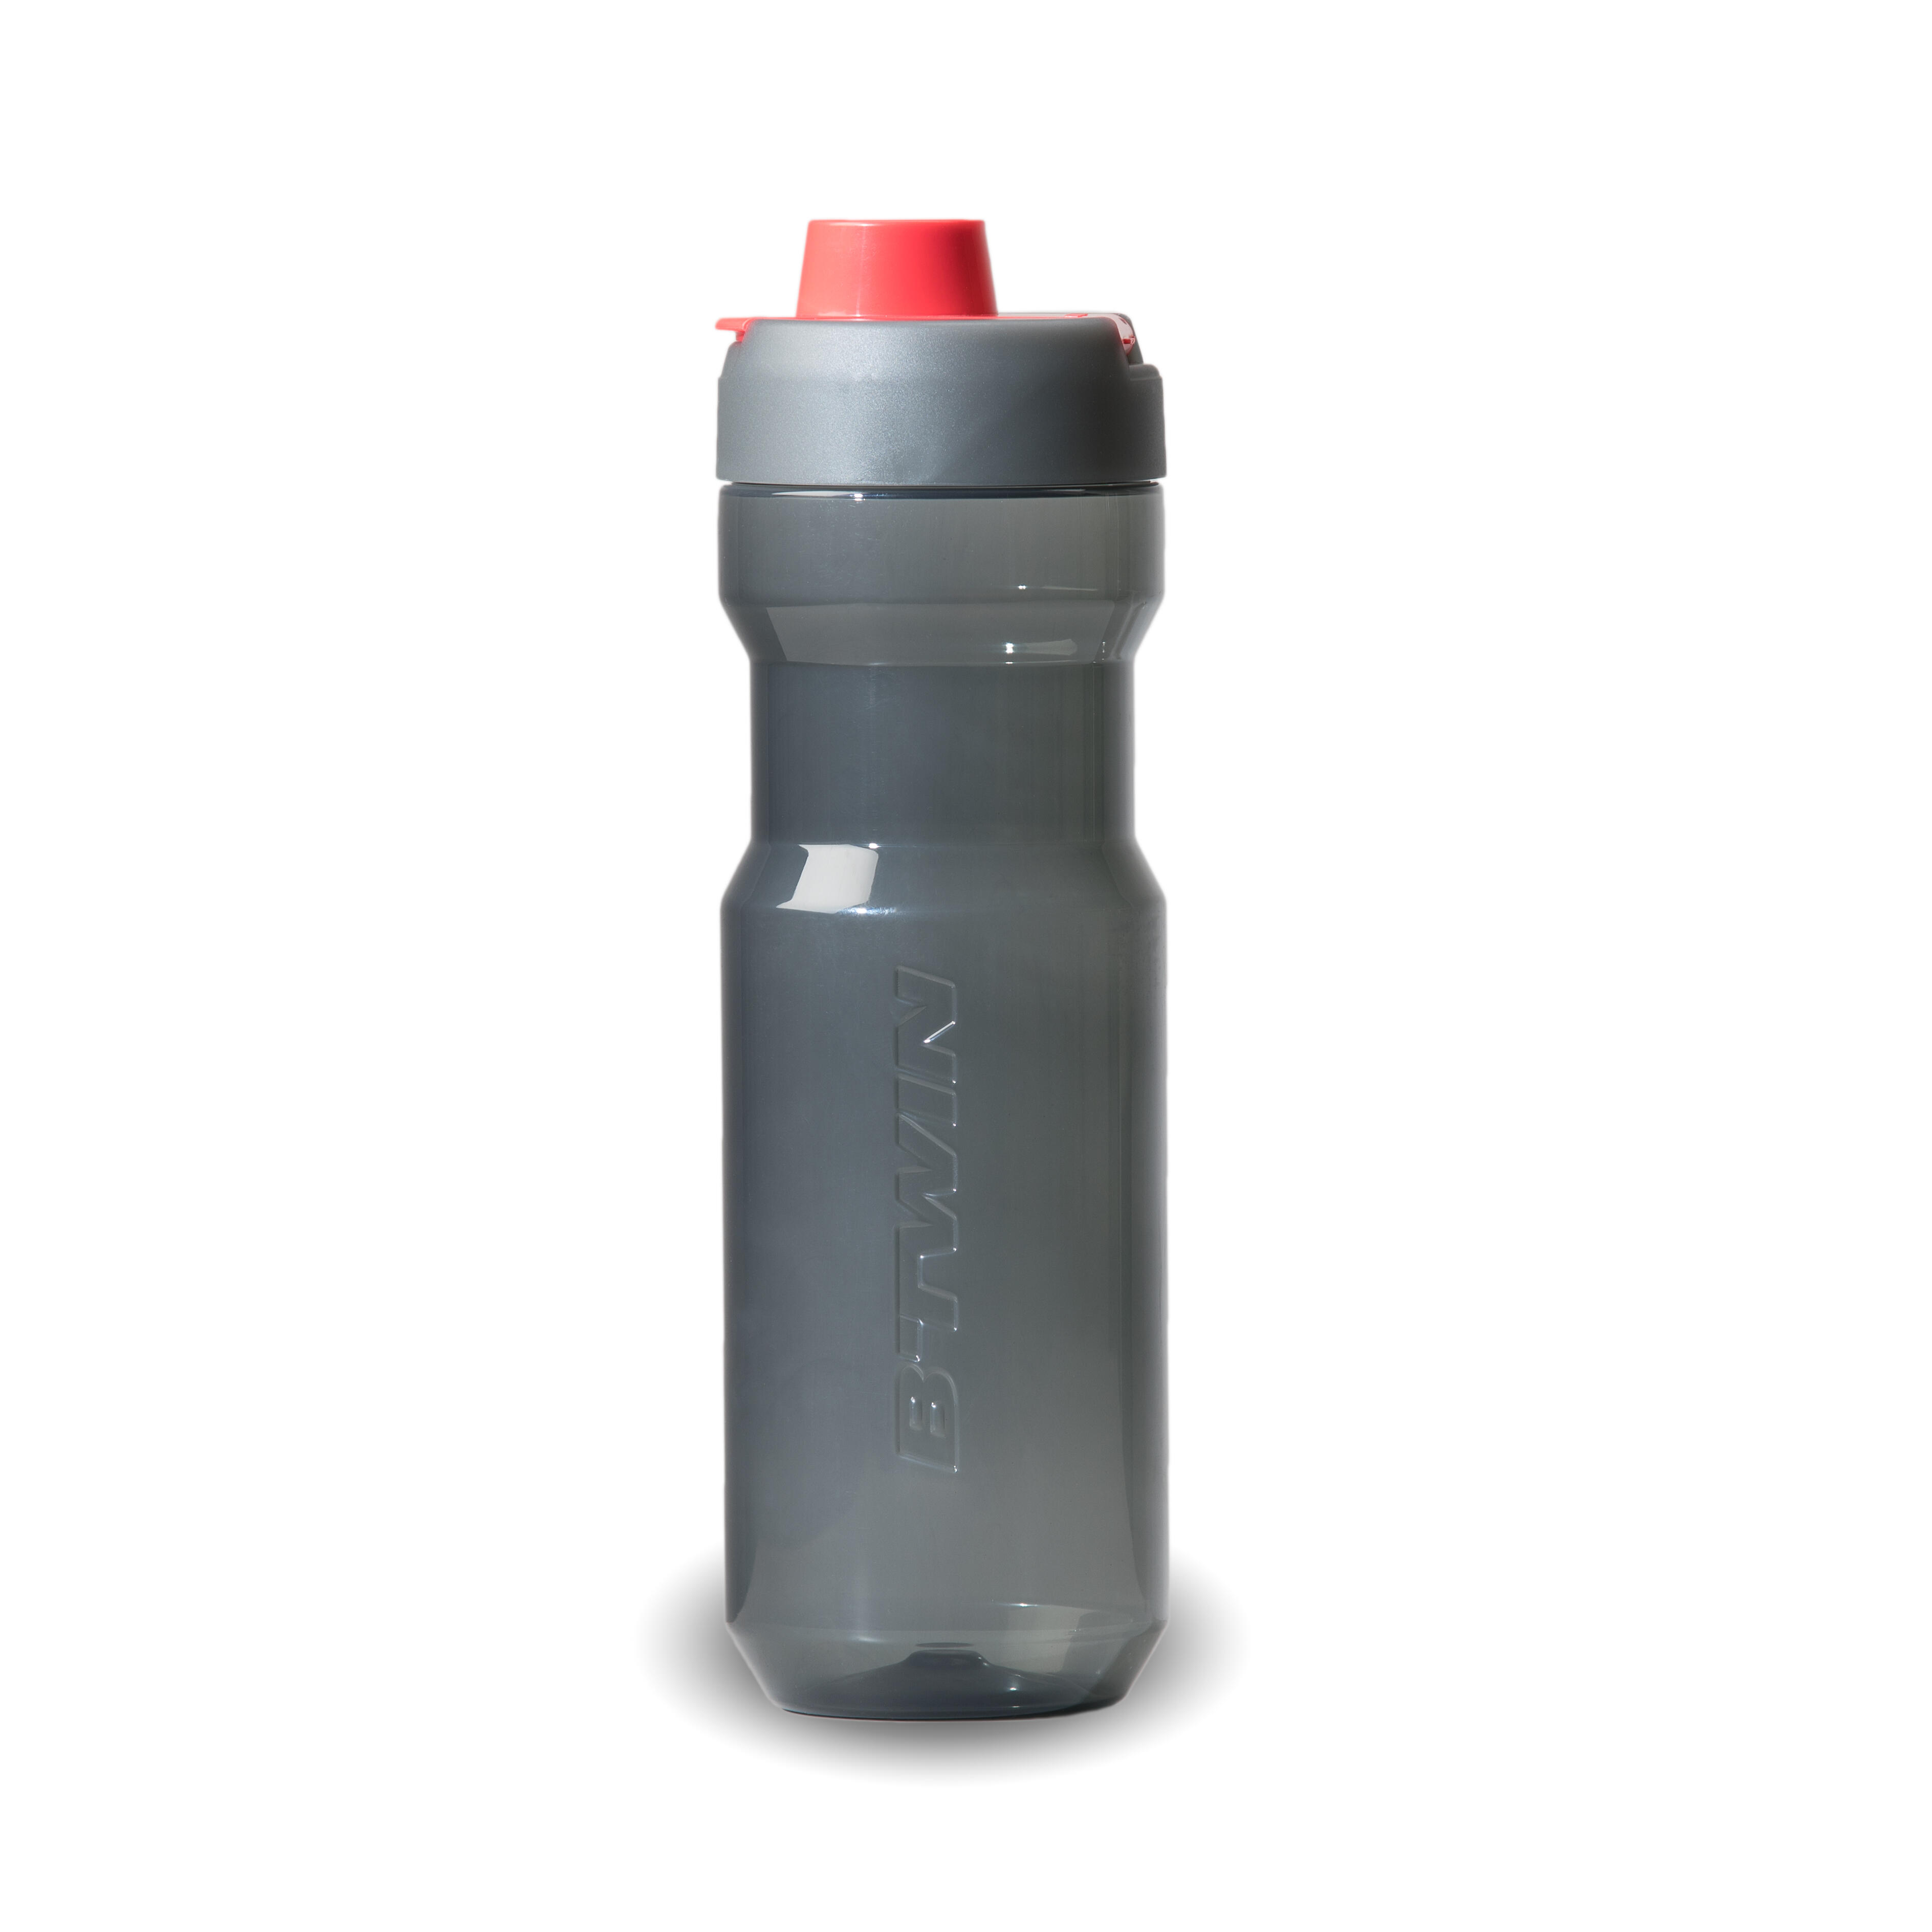 decathlon water container